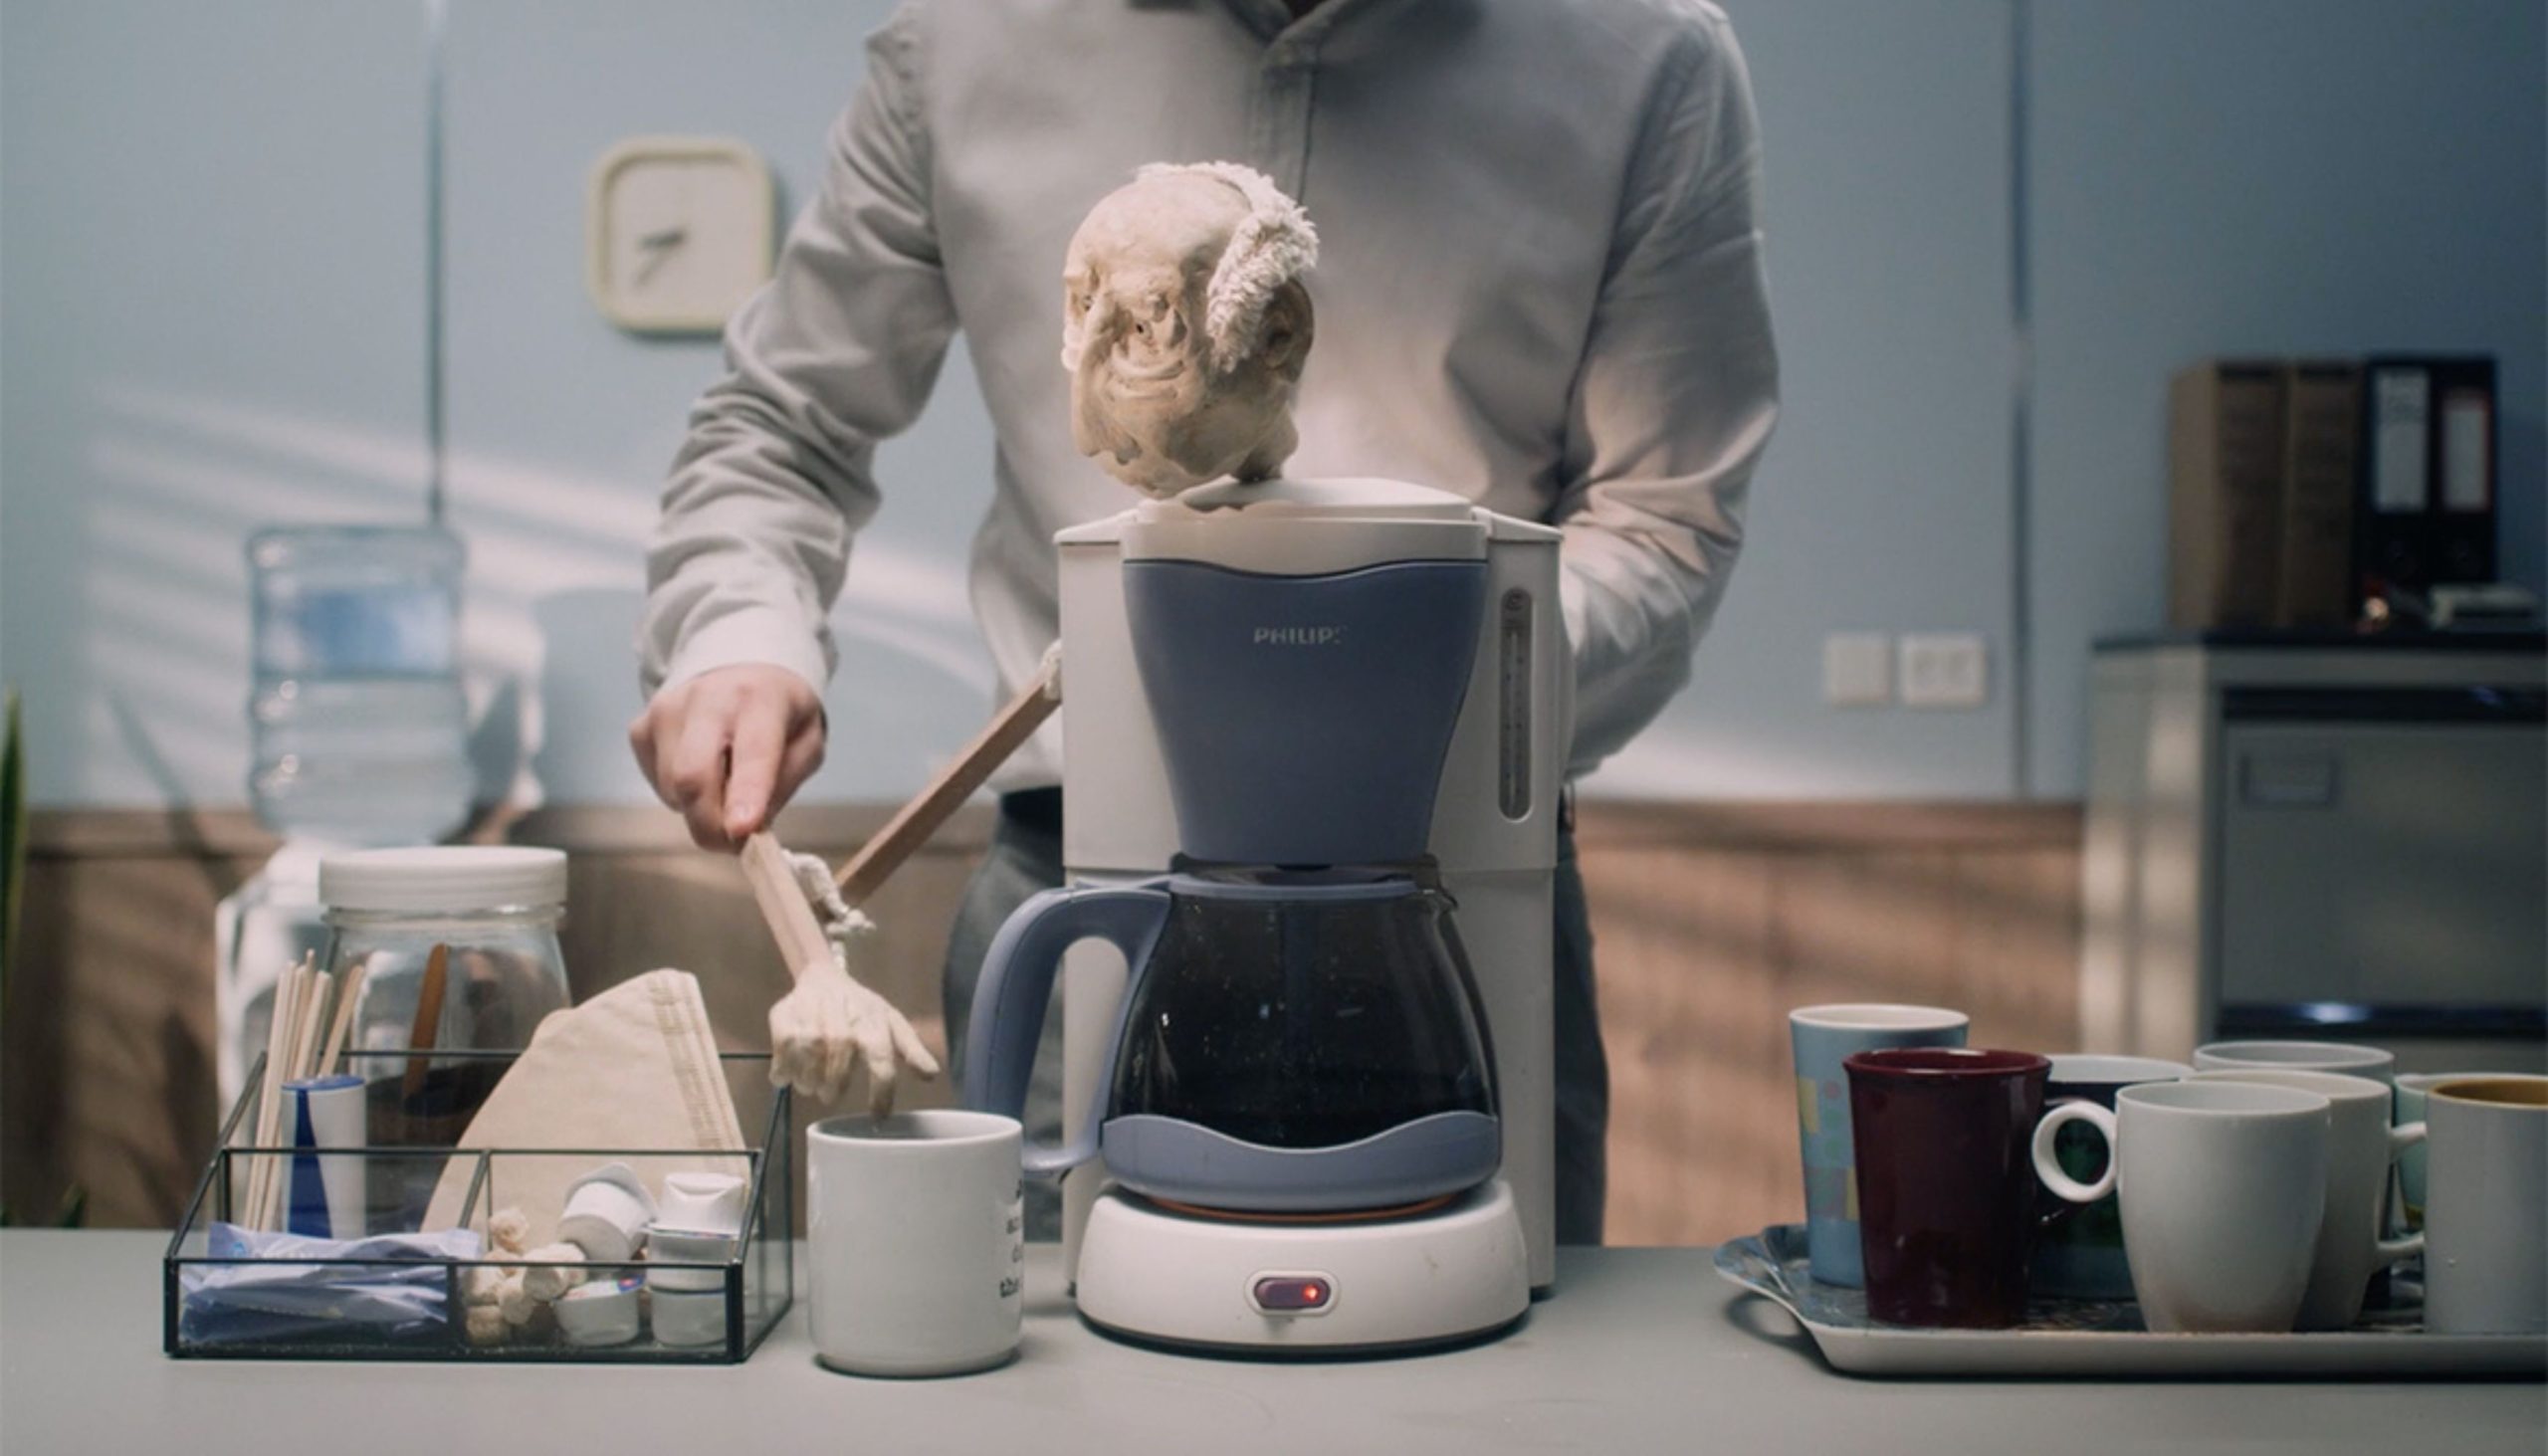 https://coffeecode.co.uk/wp-content/uploads/2021/03/philip-the-coffee-maker-video-scaled.jpg